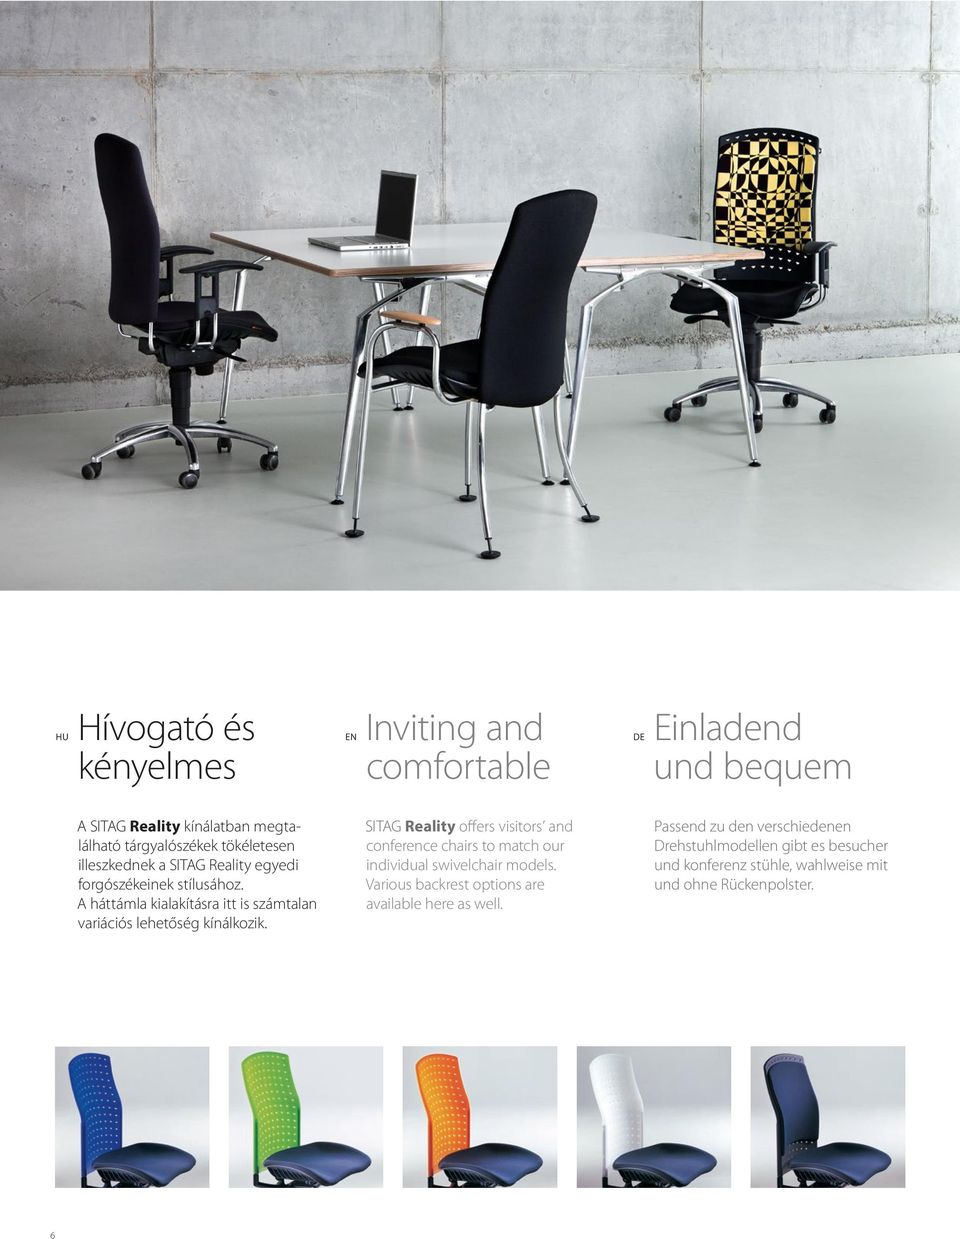 SITAG Reality offers visitors and conference chairs to match our individual swivel chair models.